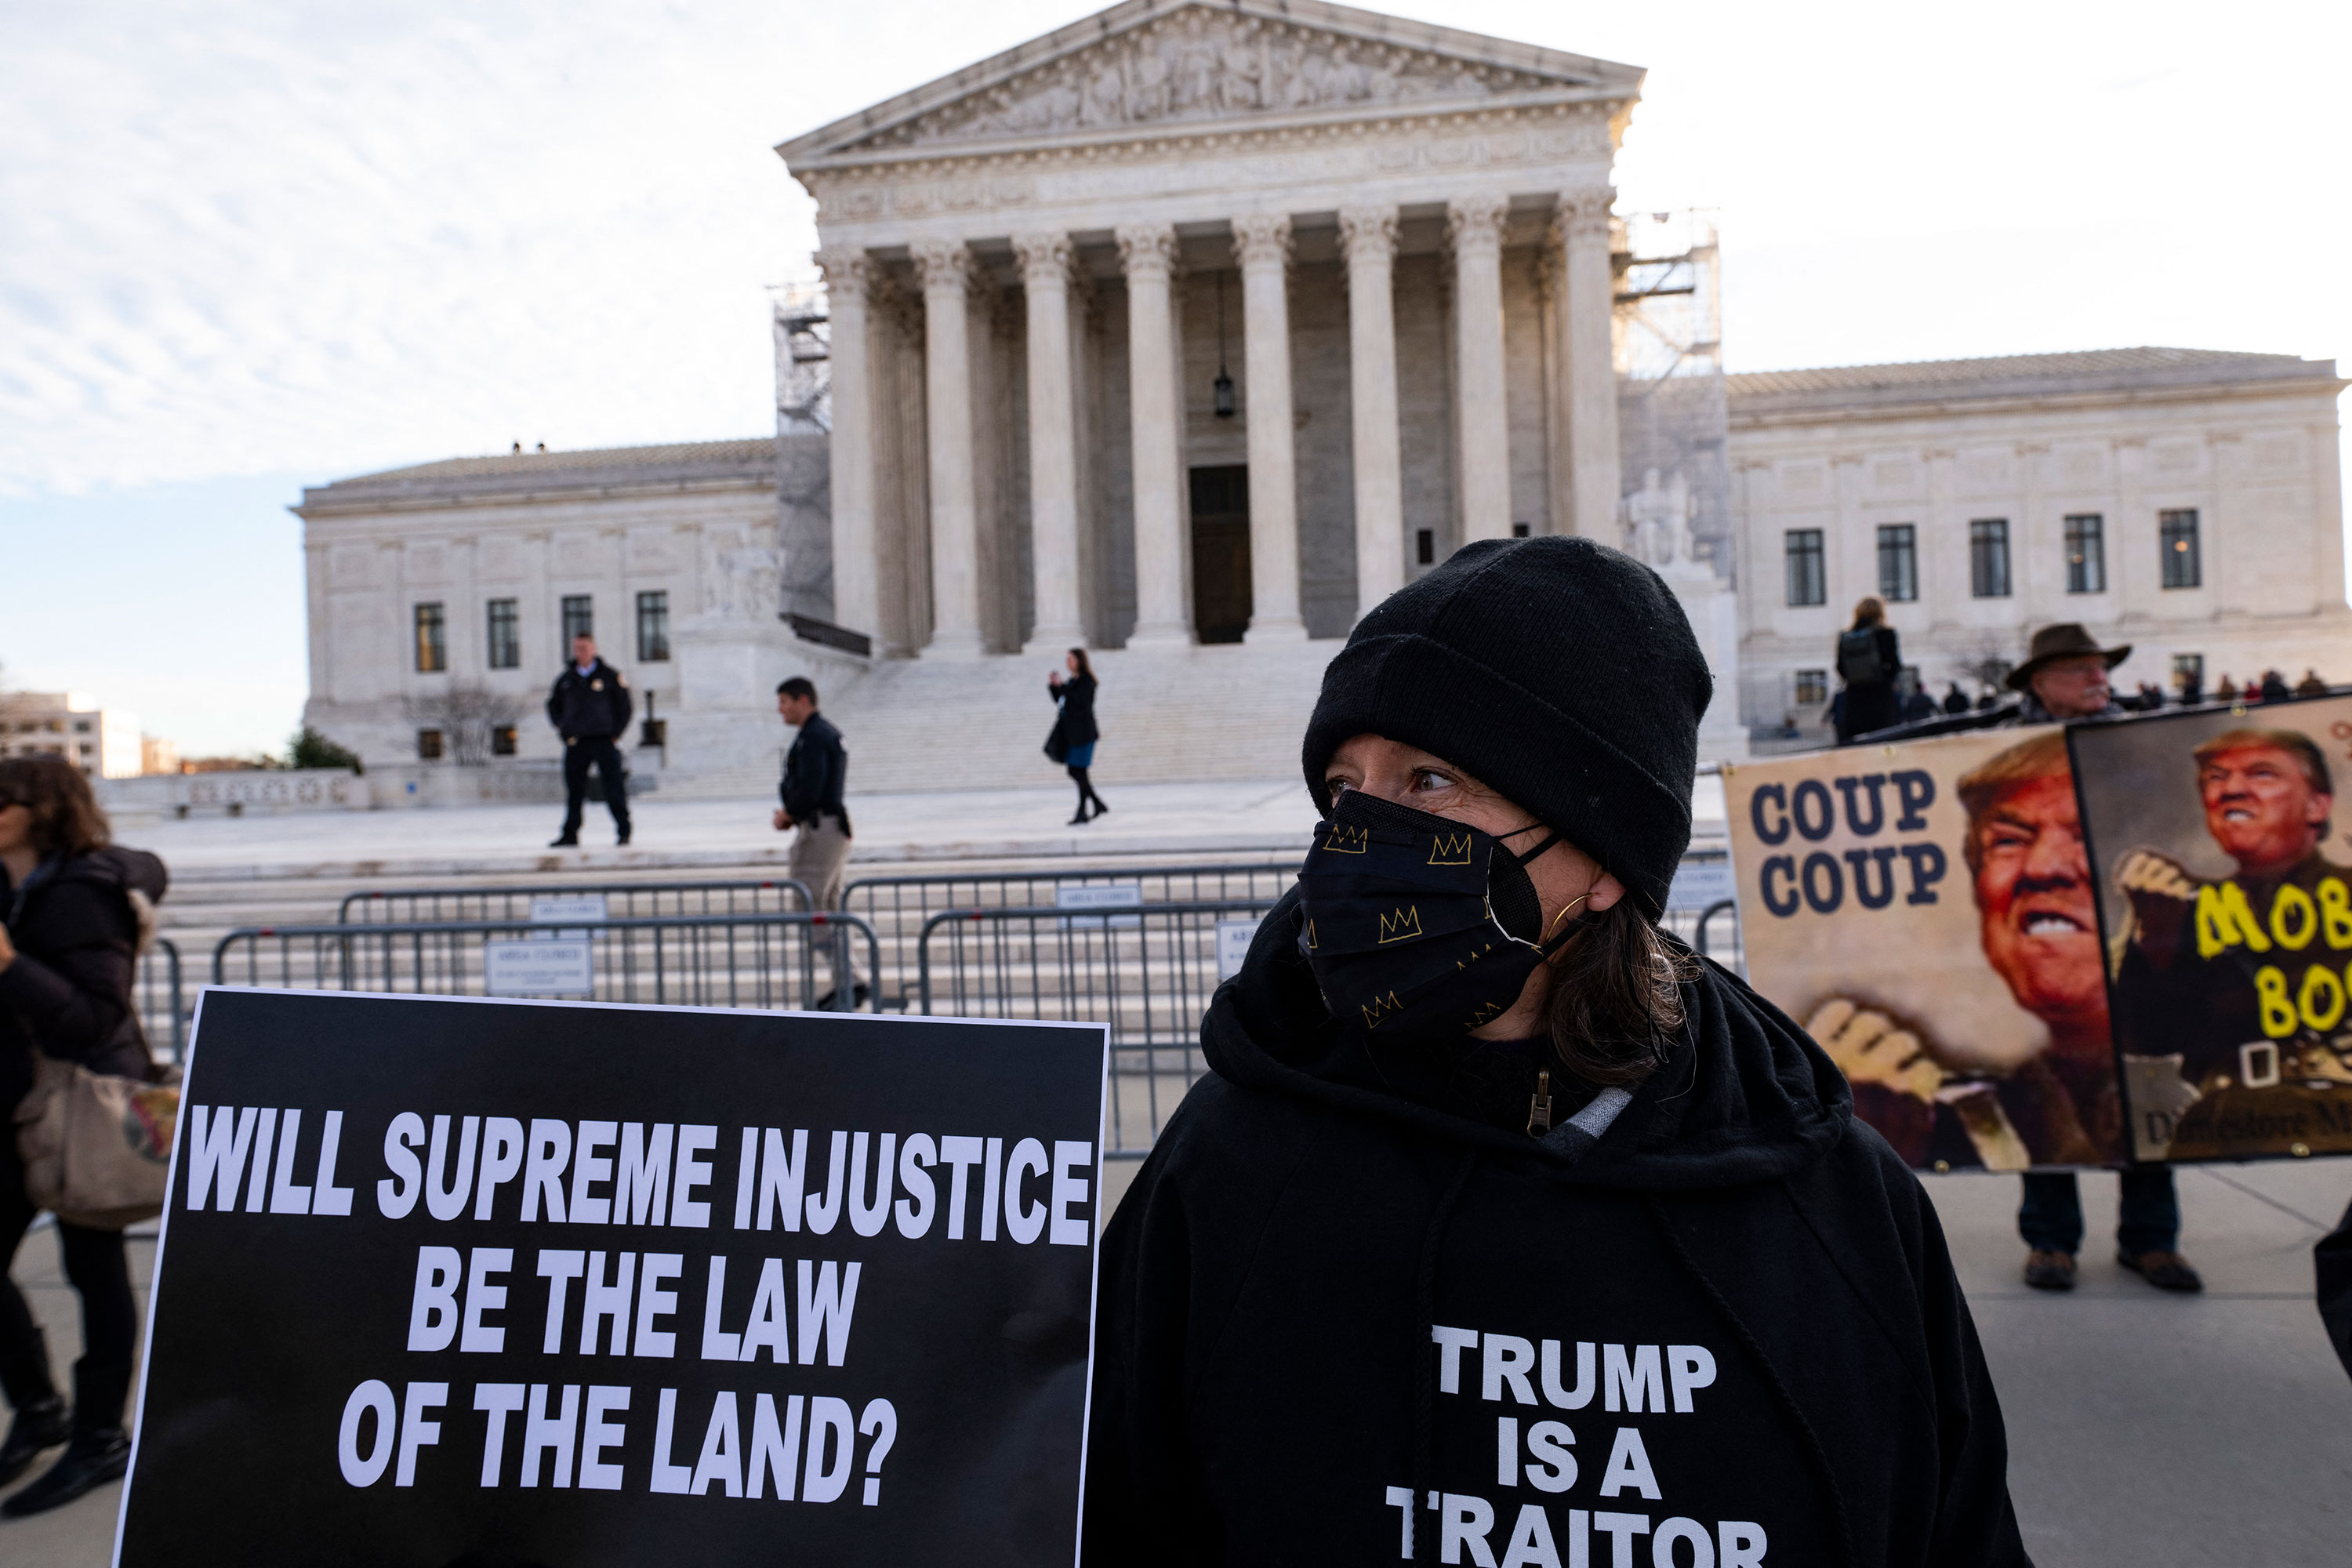 A person protests outside the Supreme Court in Washington, DC, on Thursday morning.